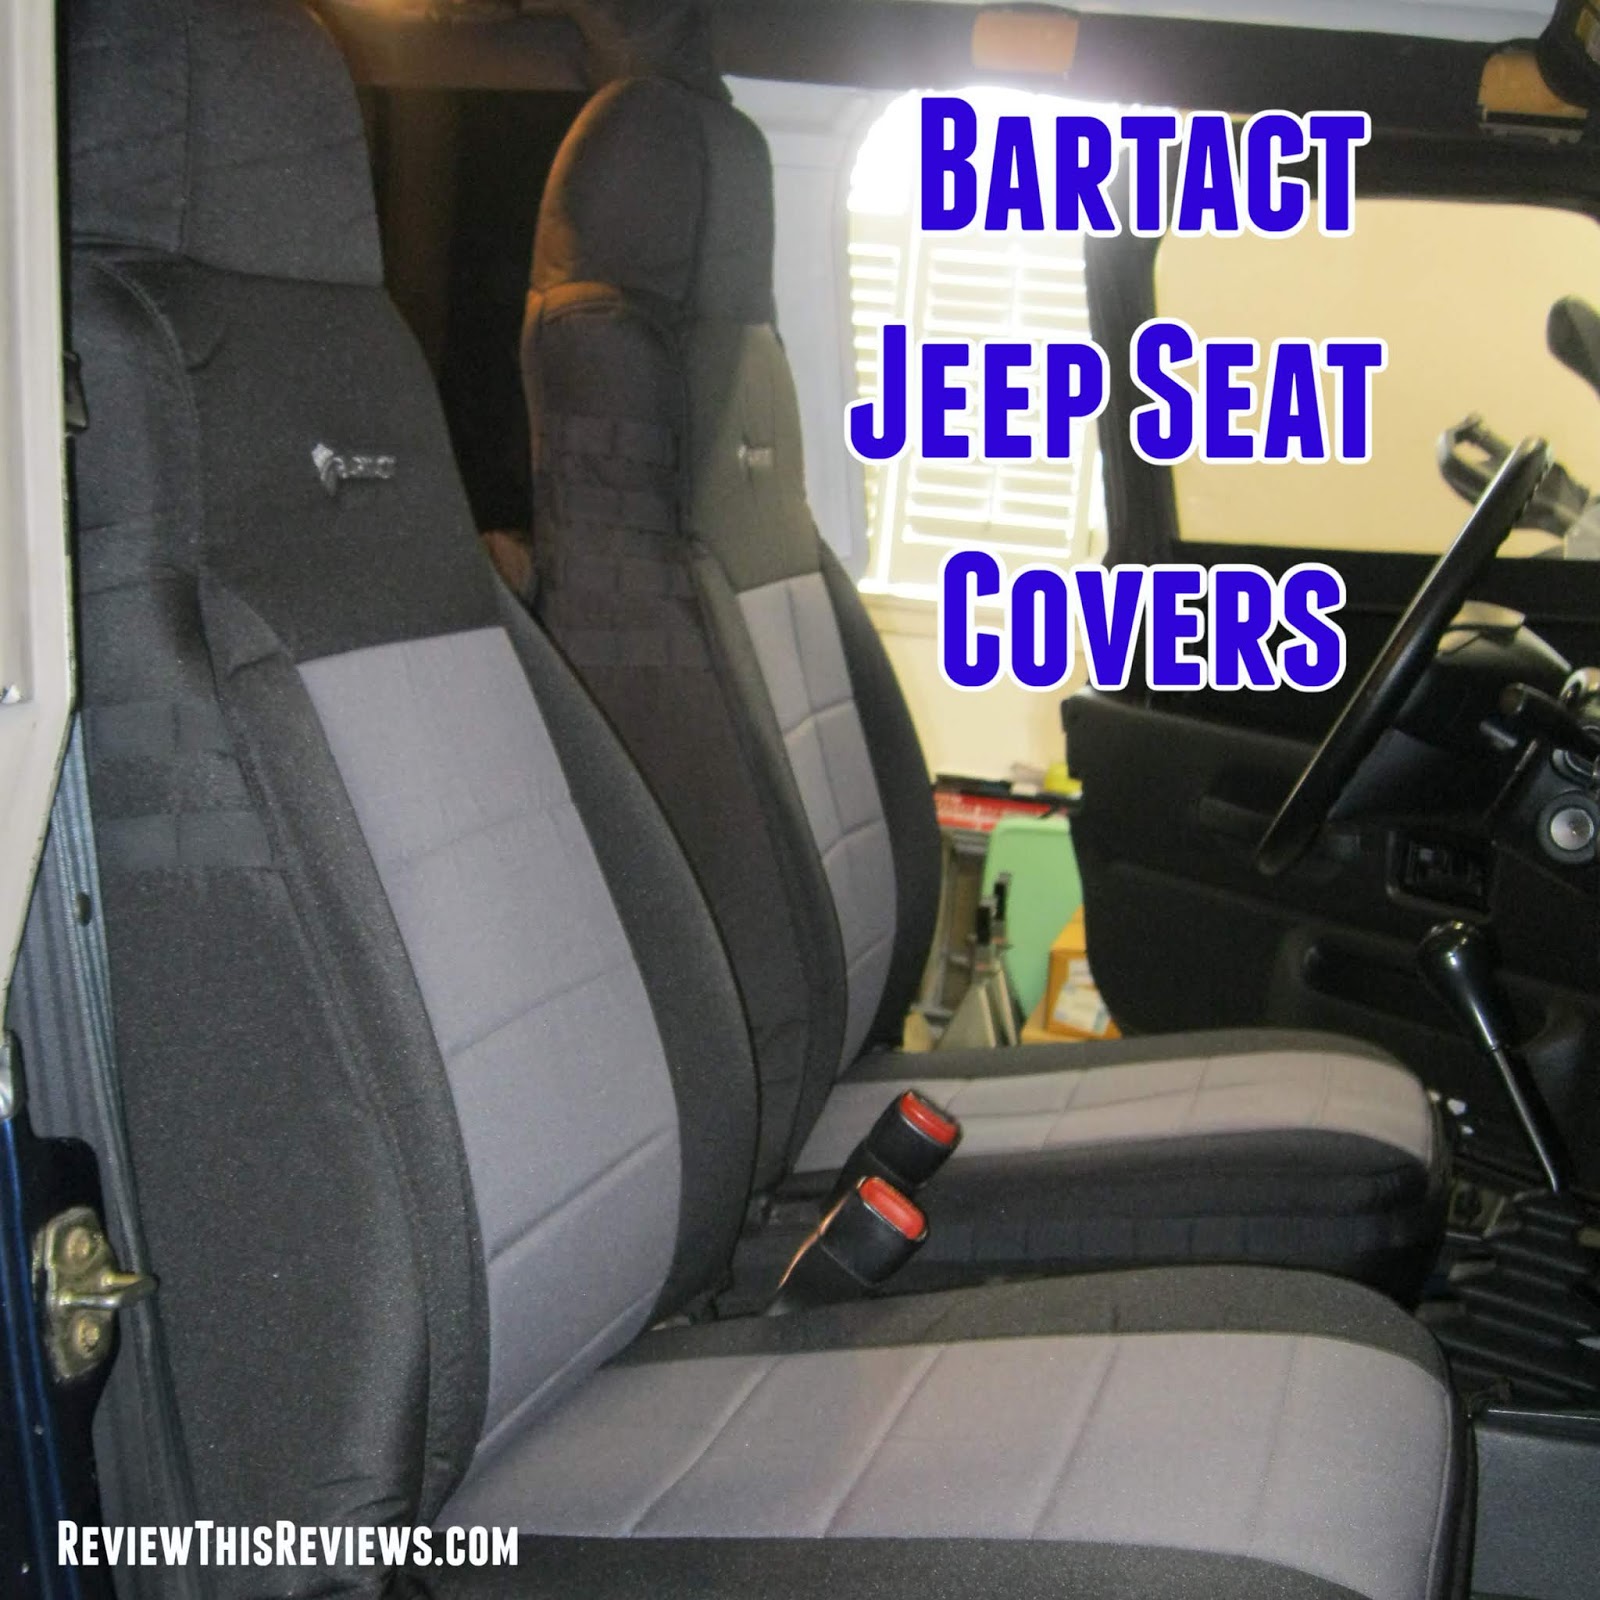 Bartact Mil-Spec Super Seat Covers for Jeep Wranglers Reviewed